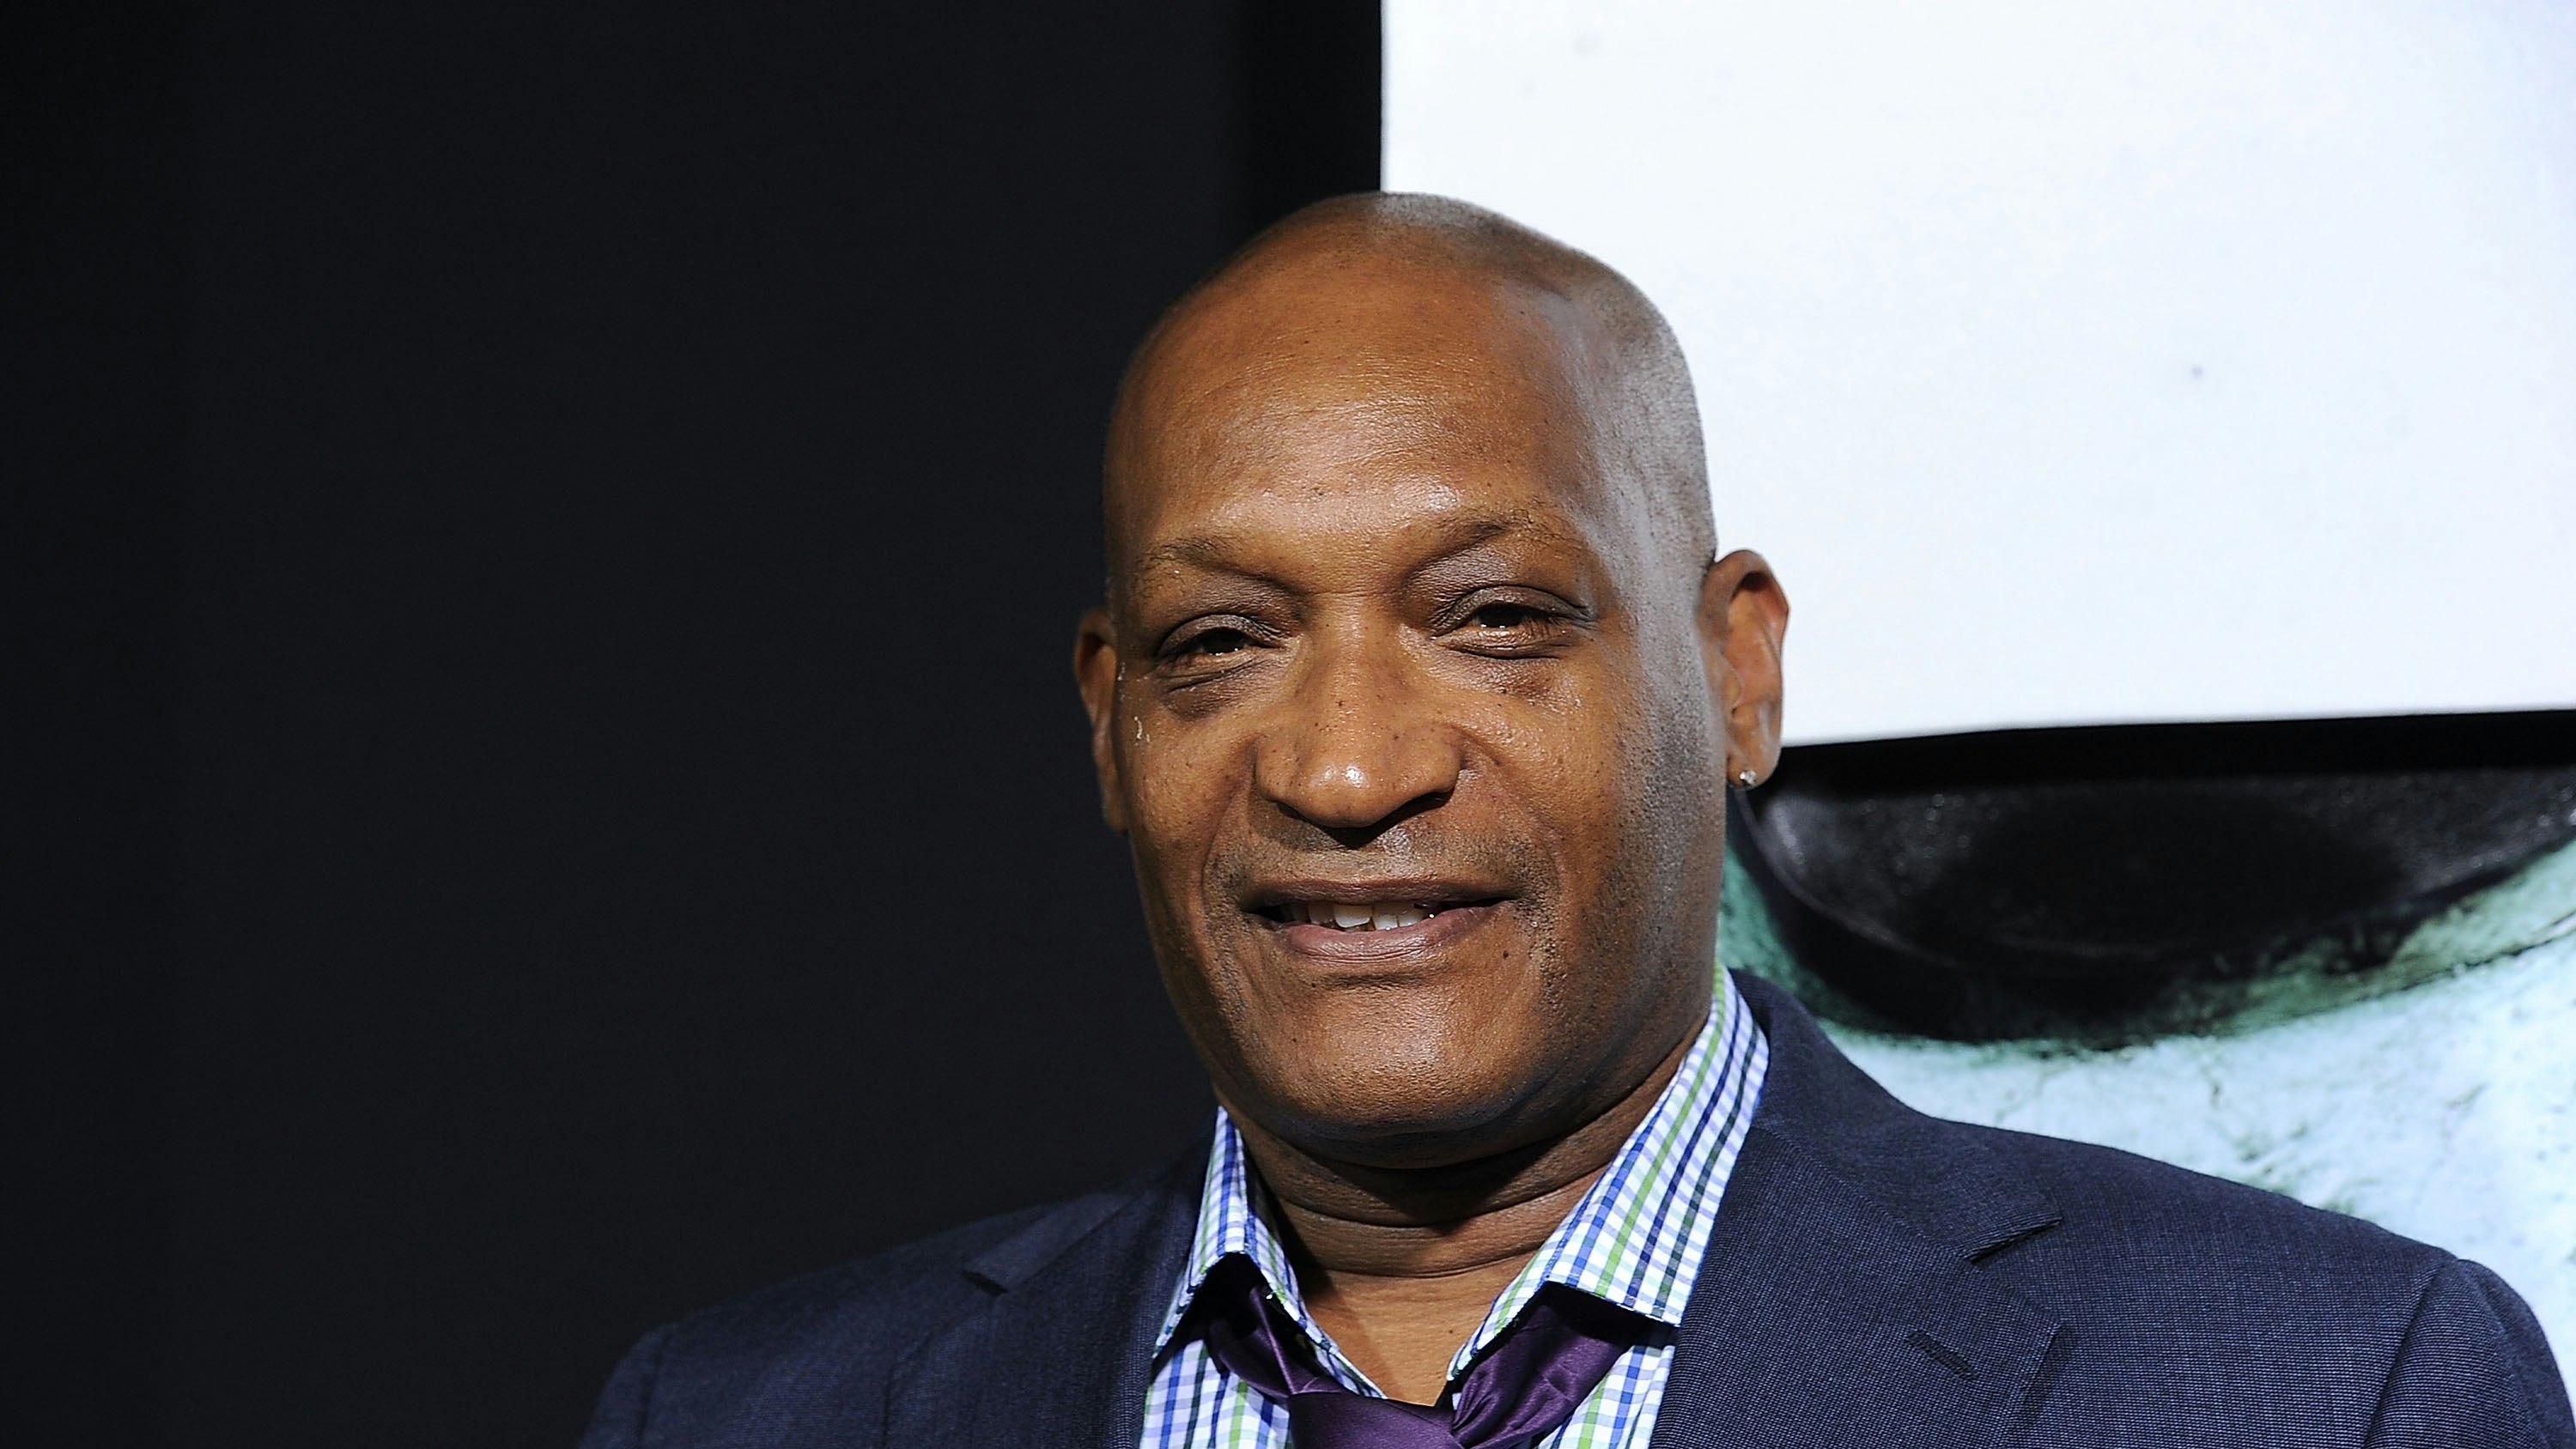 Candyman Star Tony Todd Believes Fans Will Be Proud Of New Film - TODAY